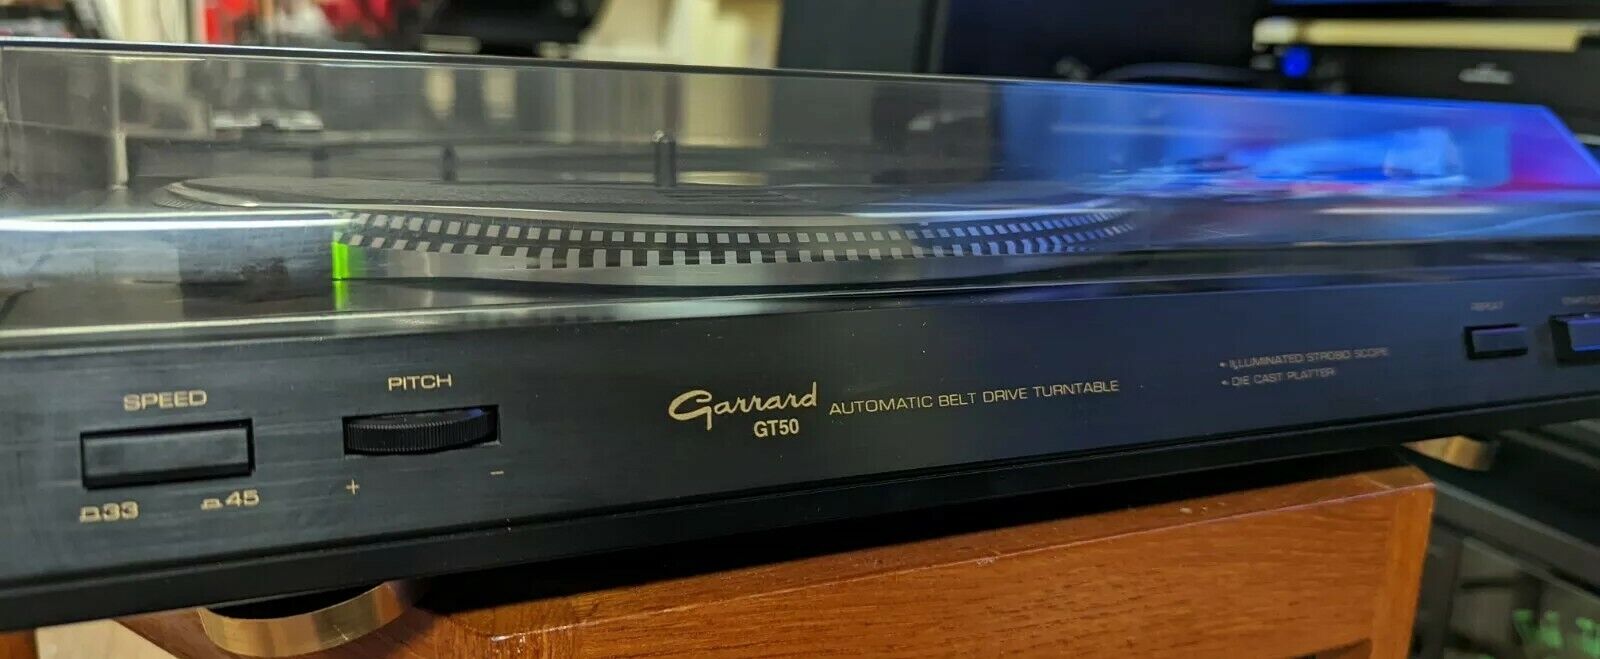 Garrard GT-50 GT0 turntable - cosmetically great, unknown functionality.  As-is.